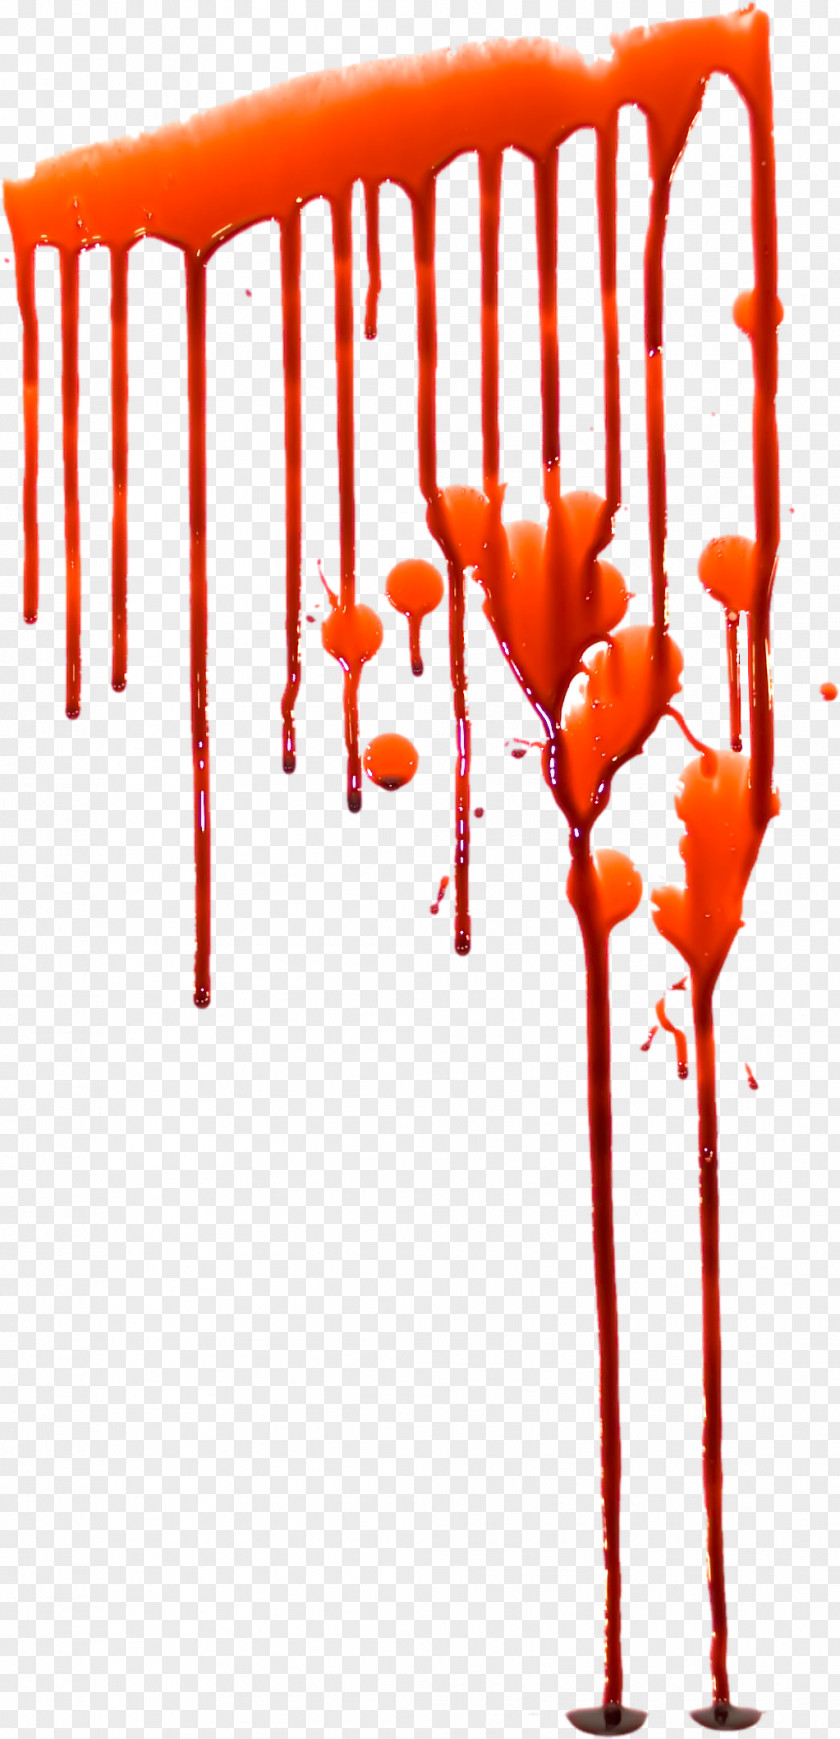 Blood Image Editing Clip Art PNG